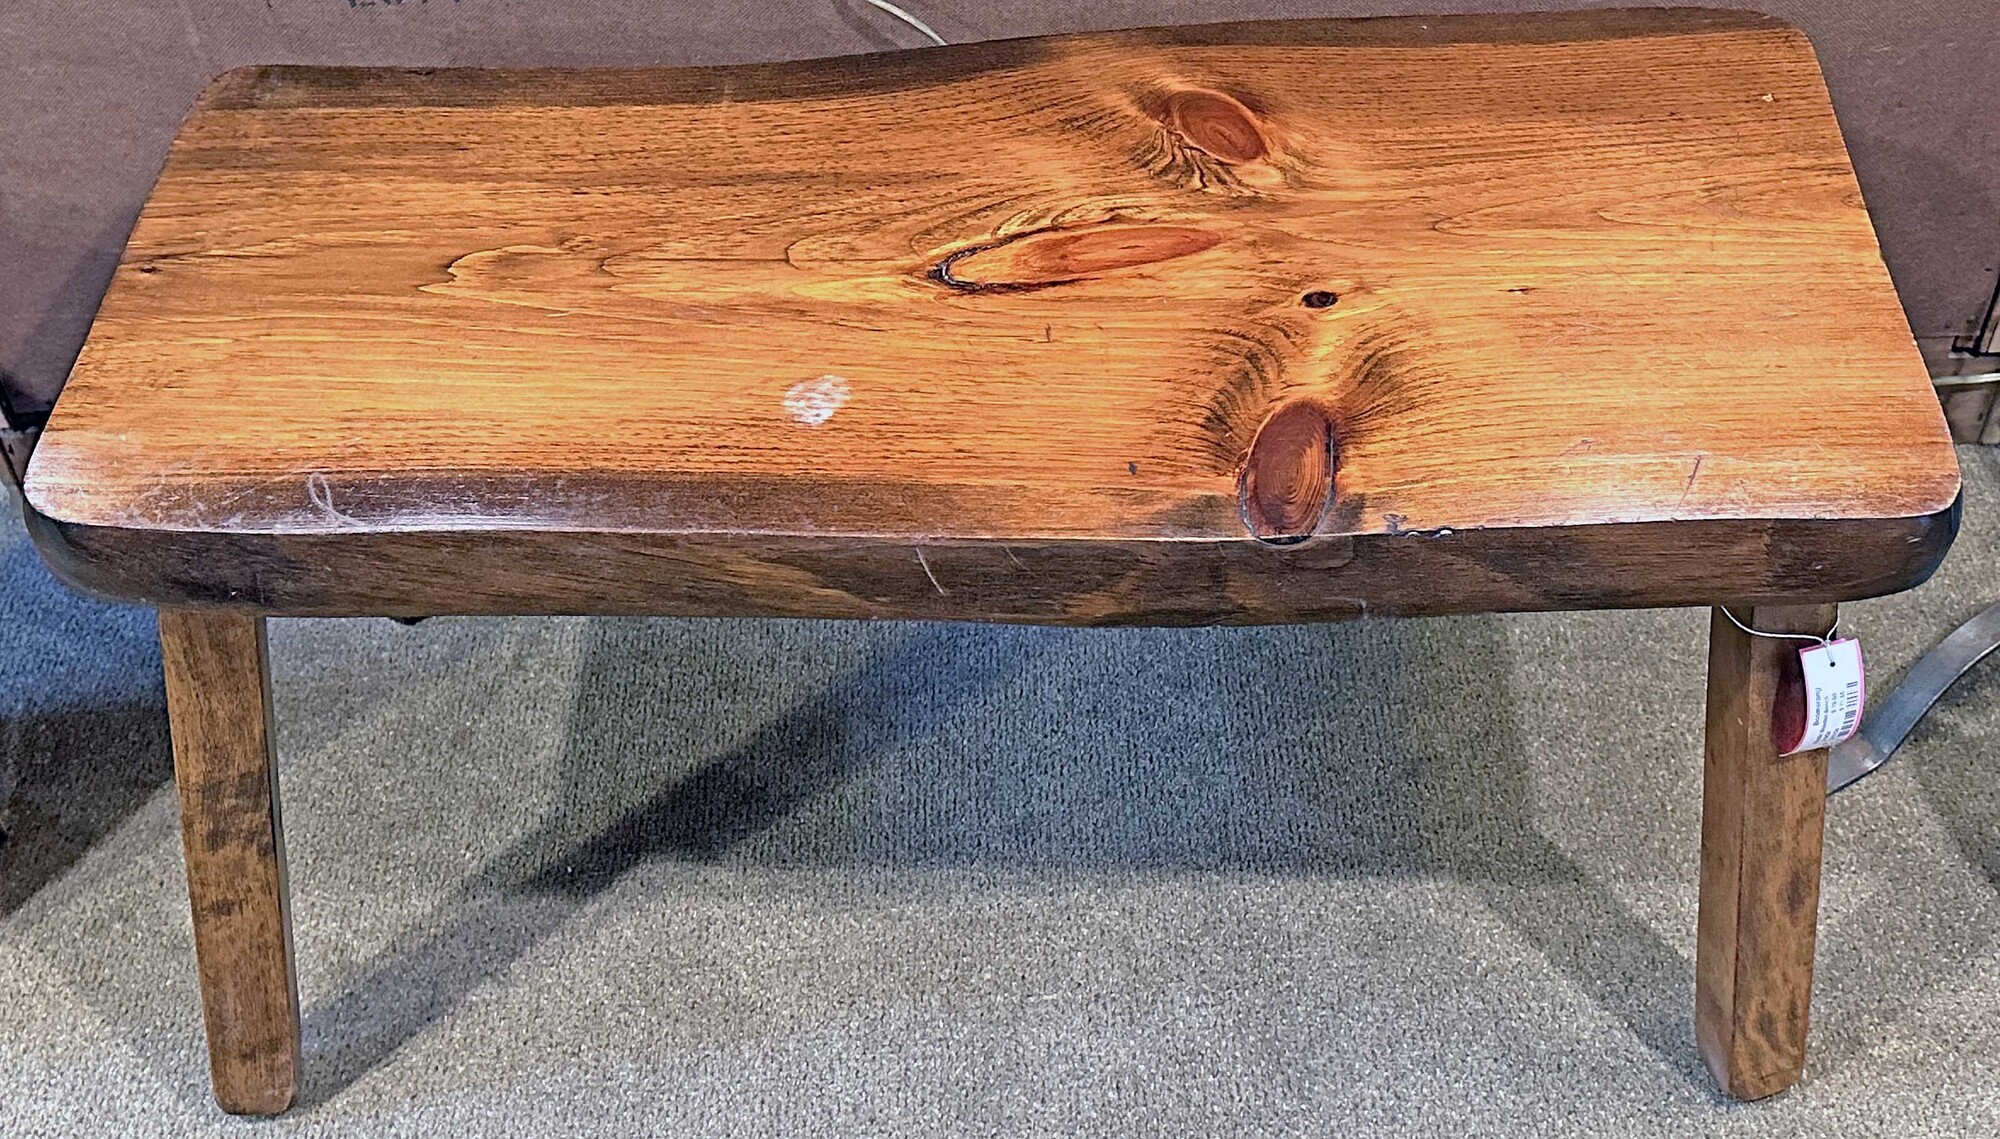 Rustic Wooden Bench
3 Ft Wide x 16 In Deep x 19 In Tall.